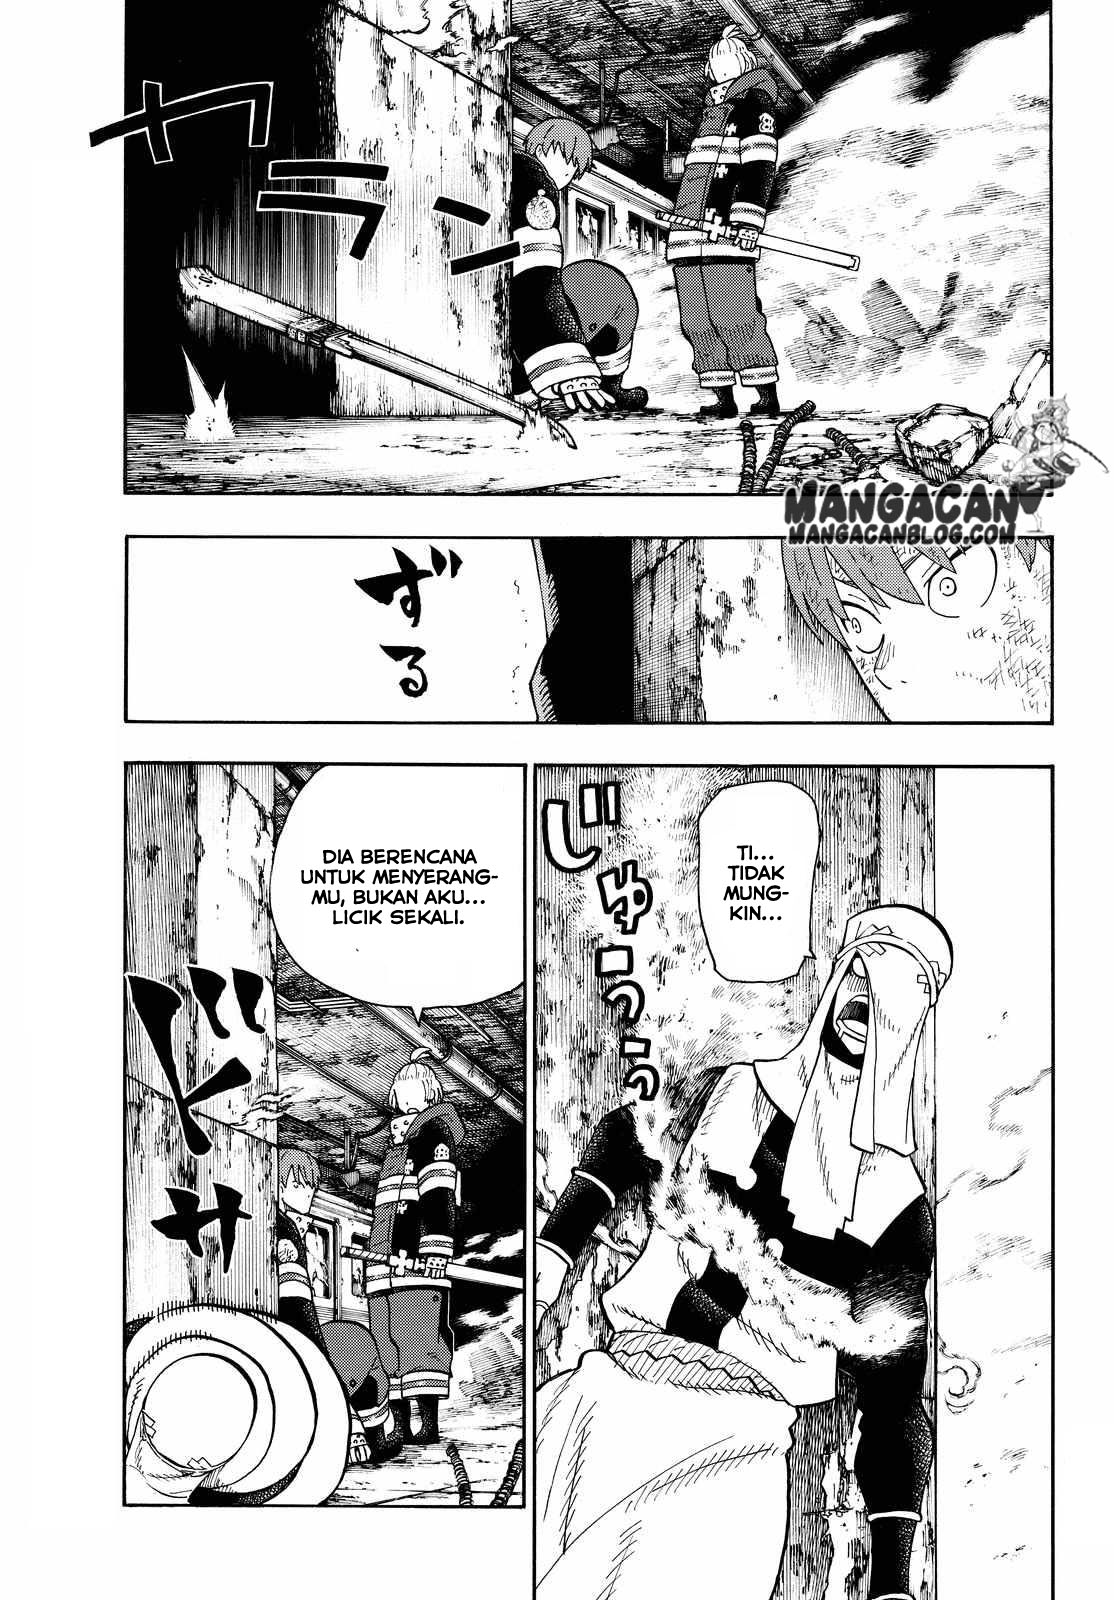 Fire Brigade of Flames Chapter 74